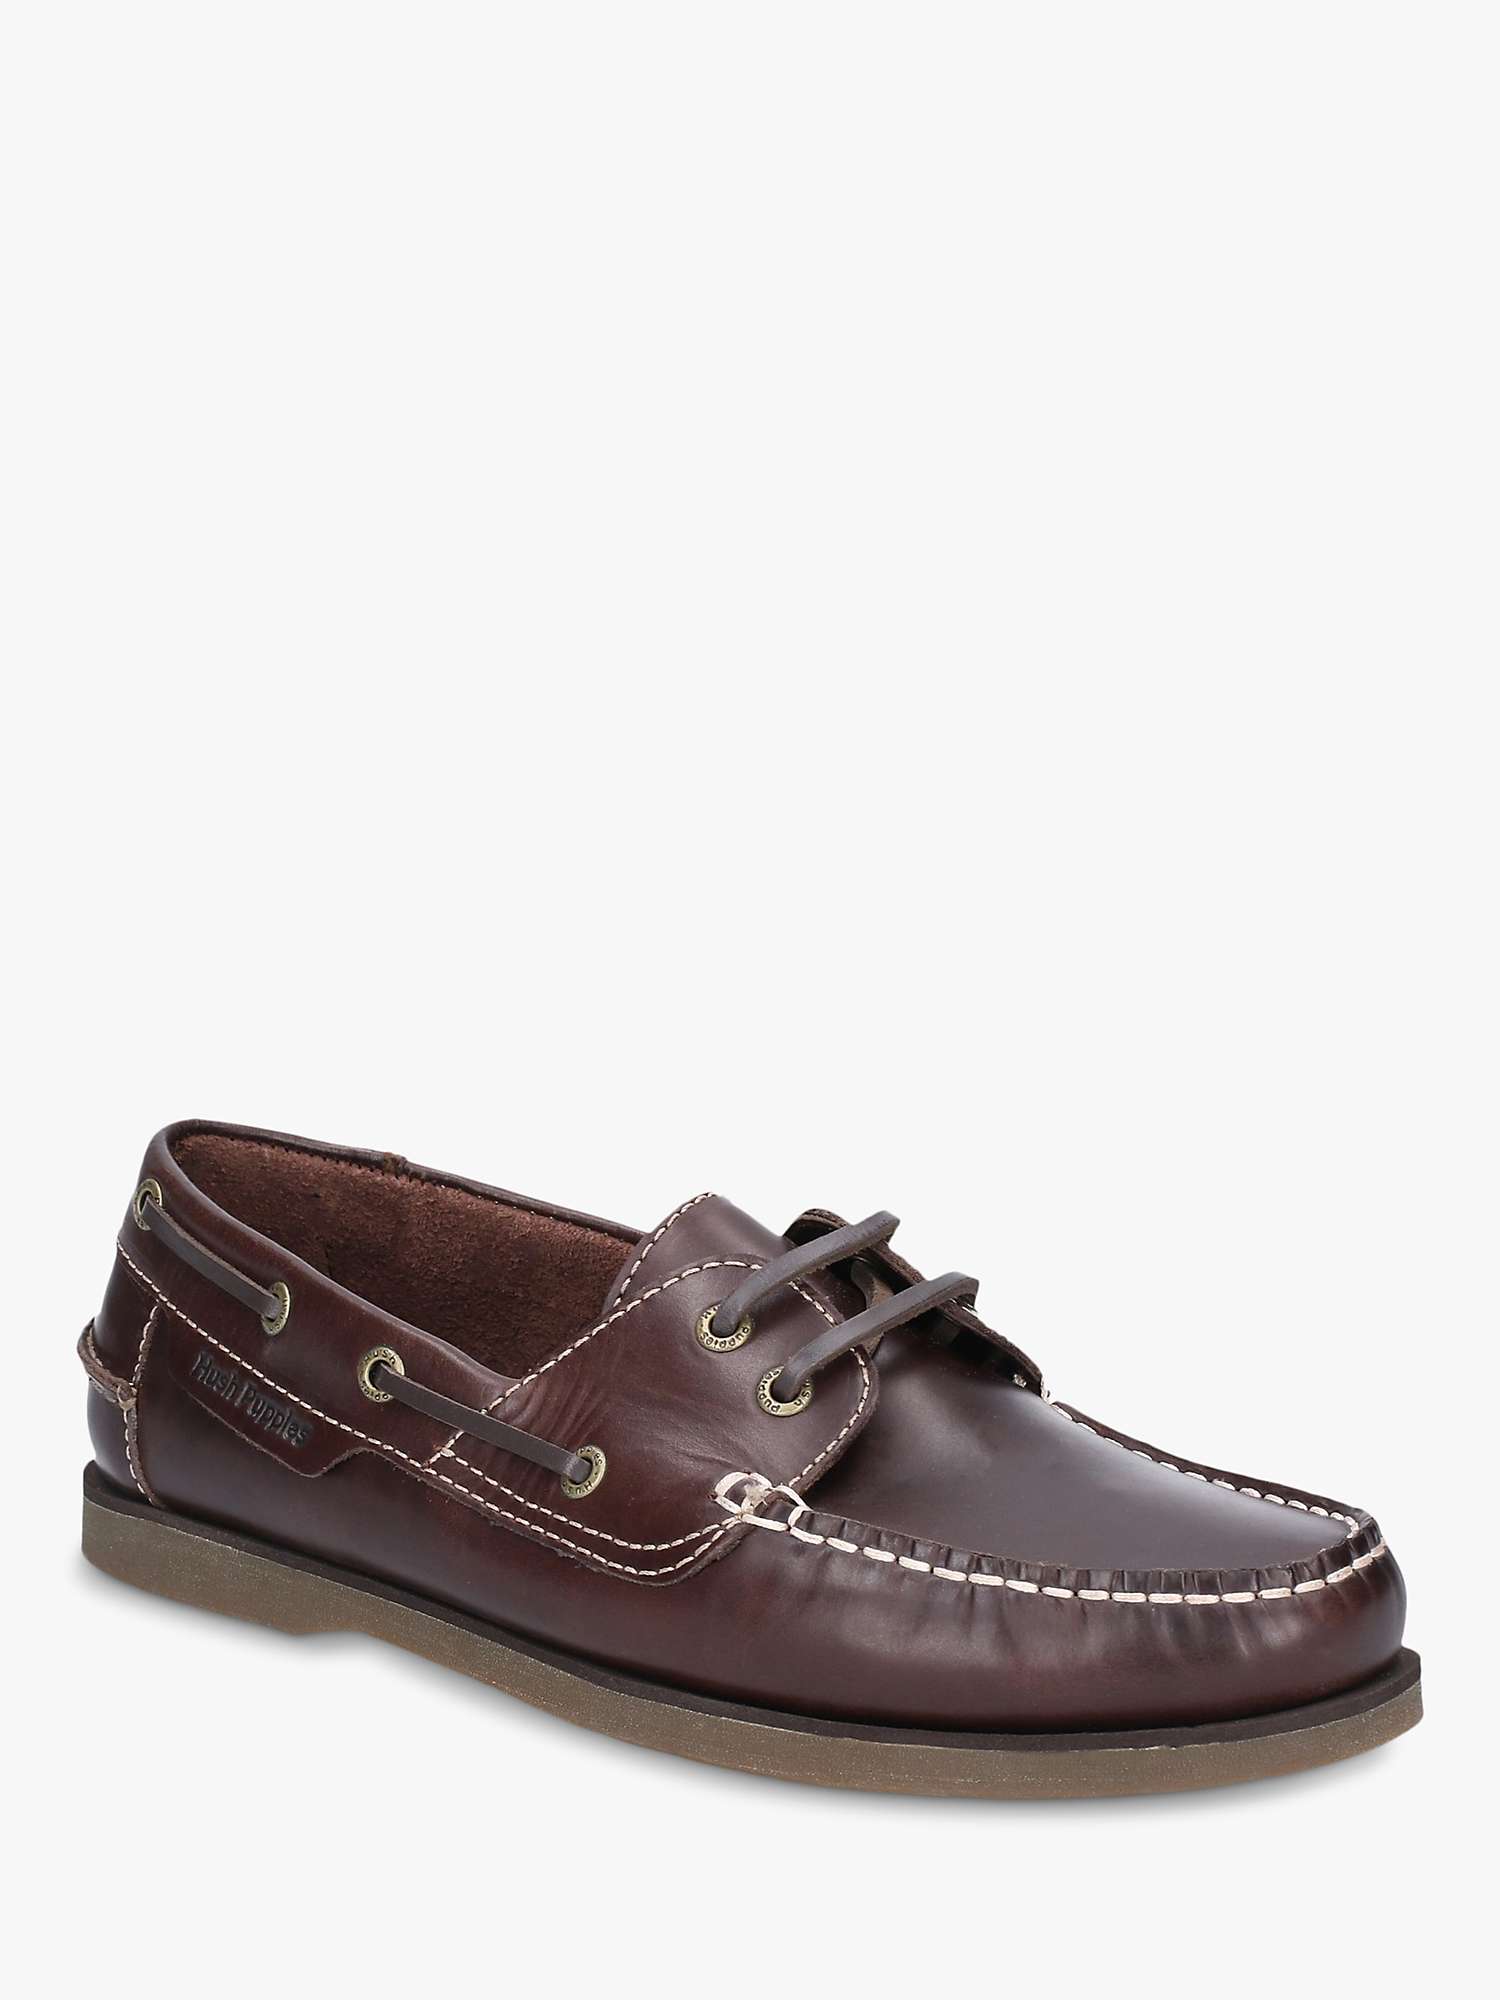 Buy Hush Puppies Henry Leather Boat Shoe Online at johnlewis.com